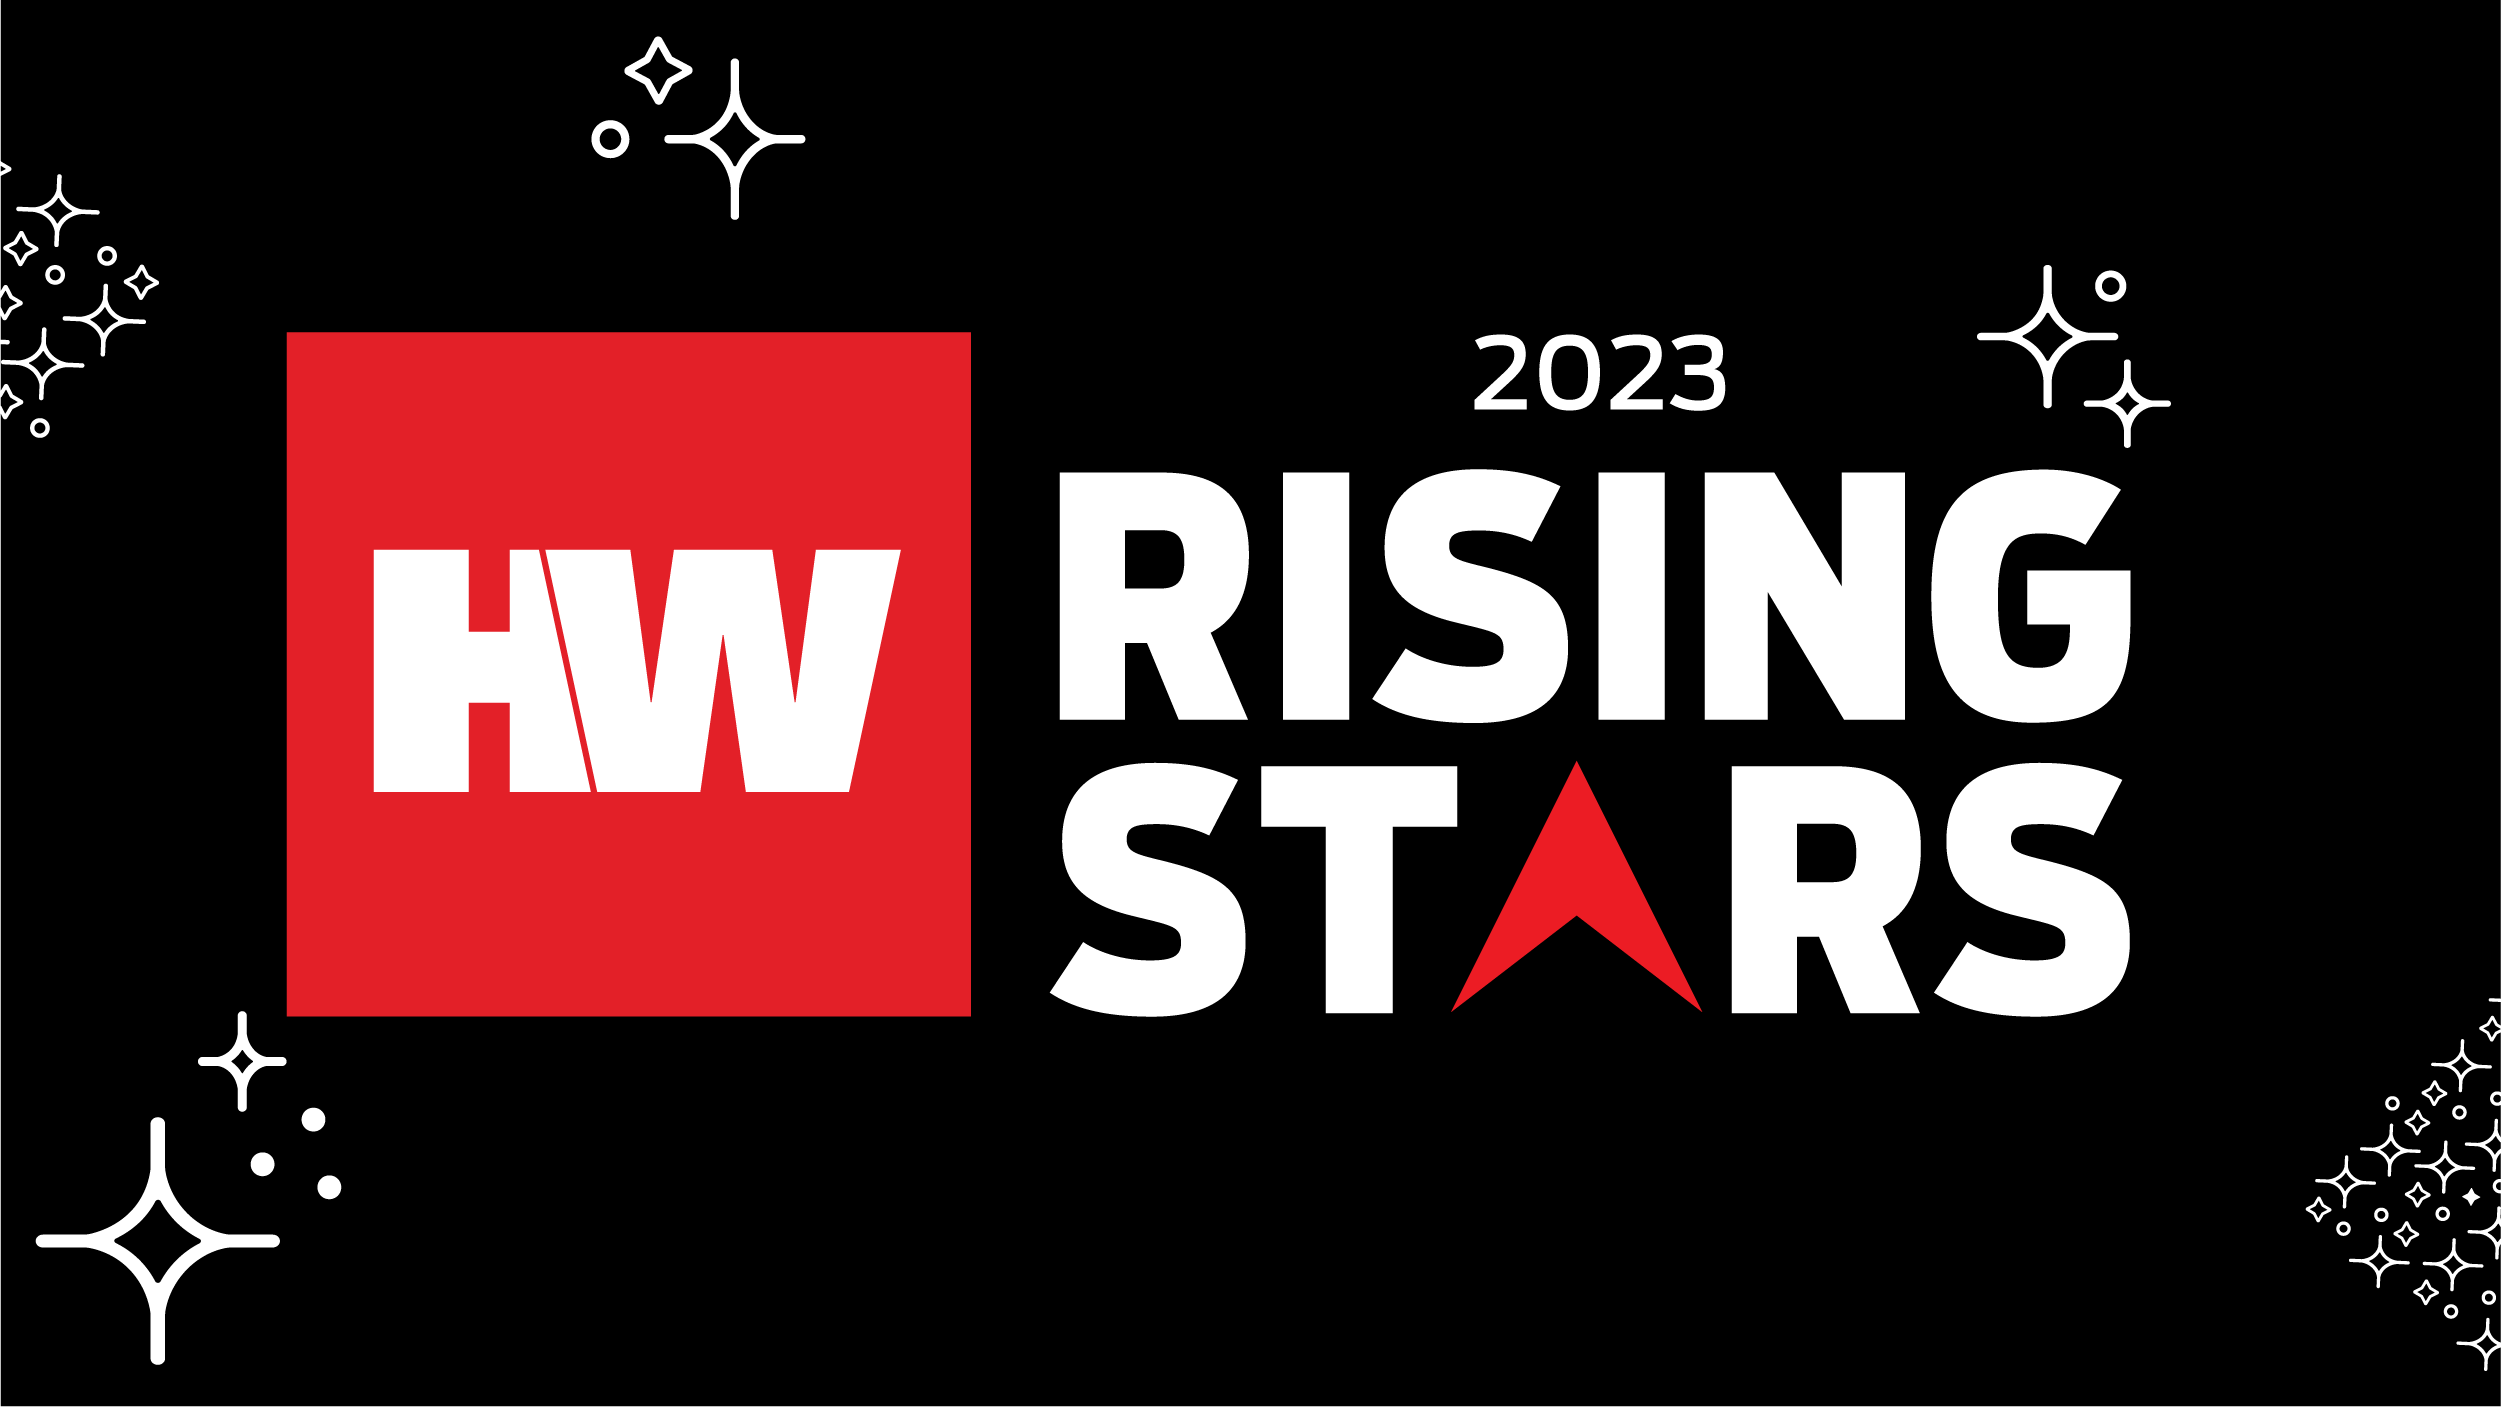 Nominations for the 2023 Rising Stars close today!